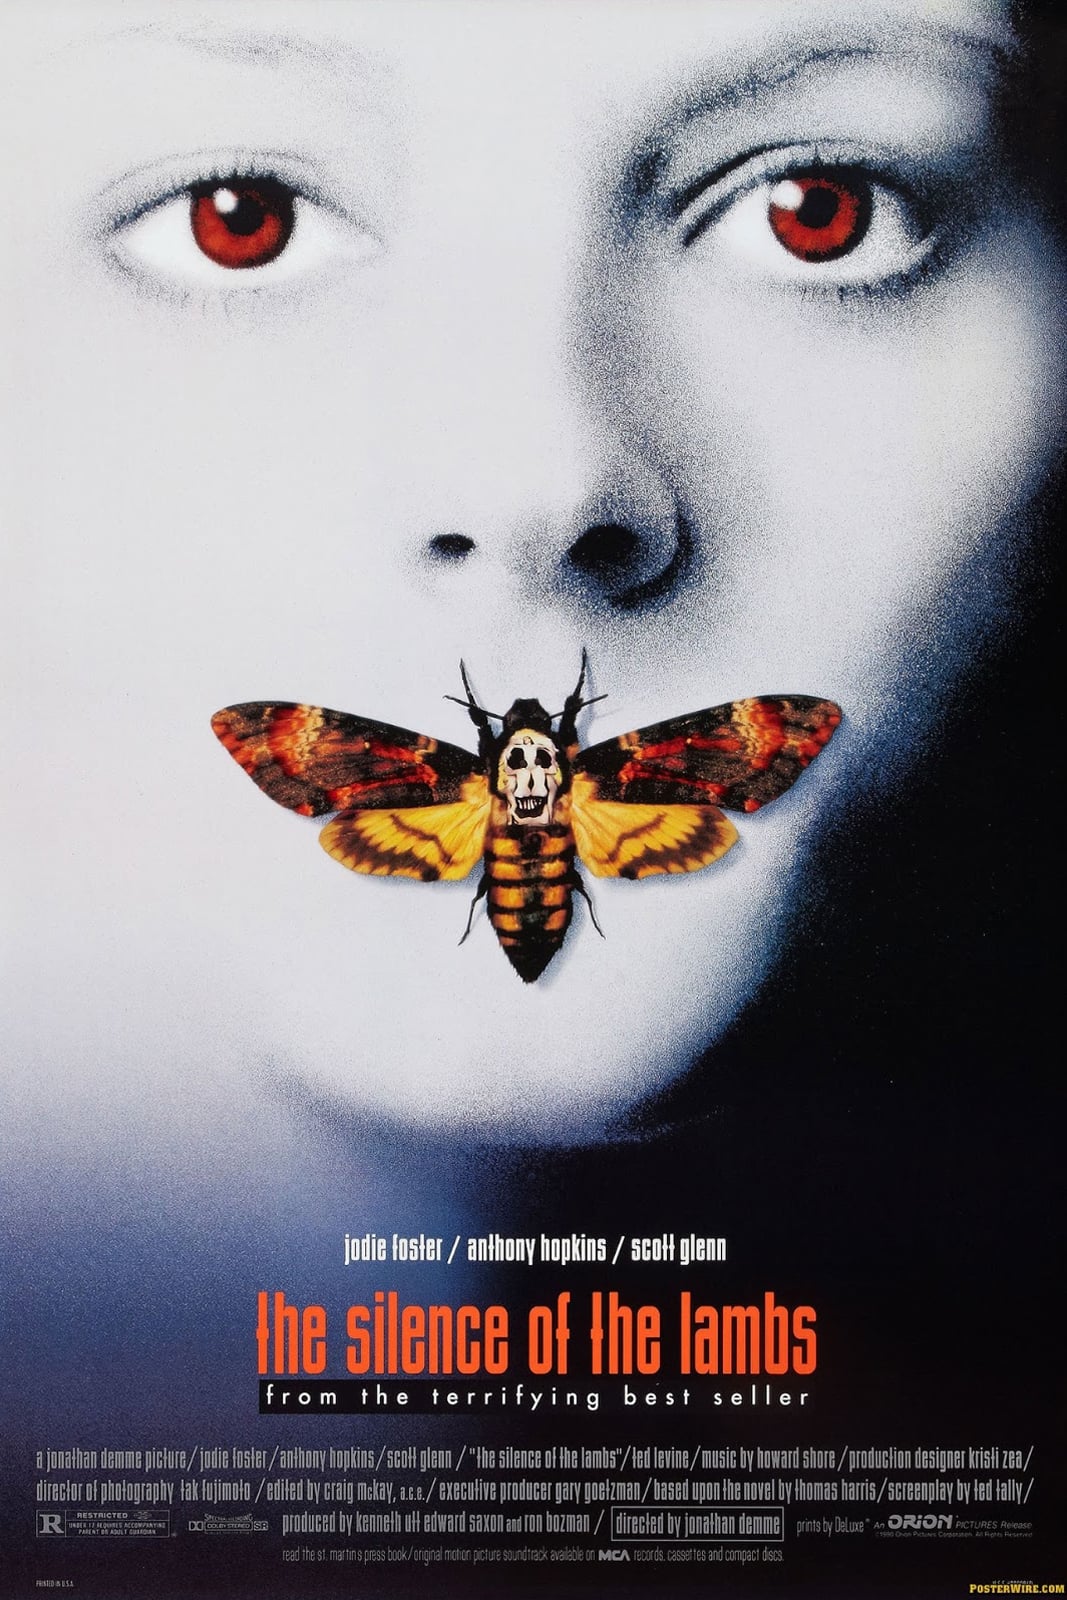 EN - The Silence Of The Lambs (1991)